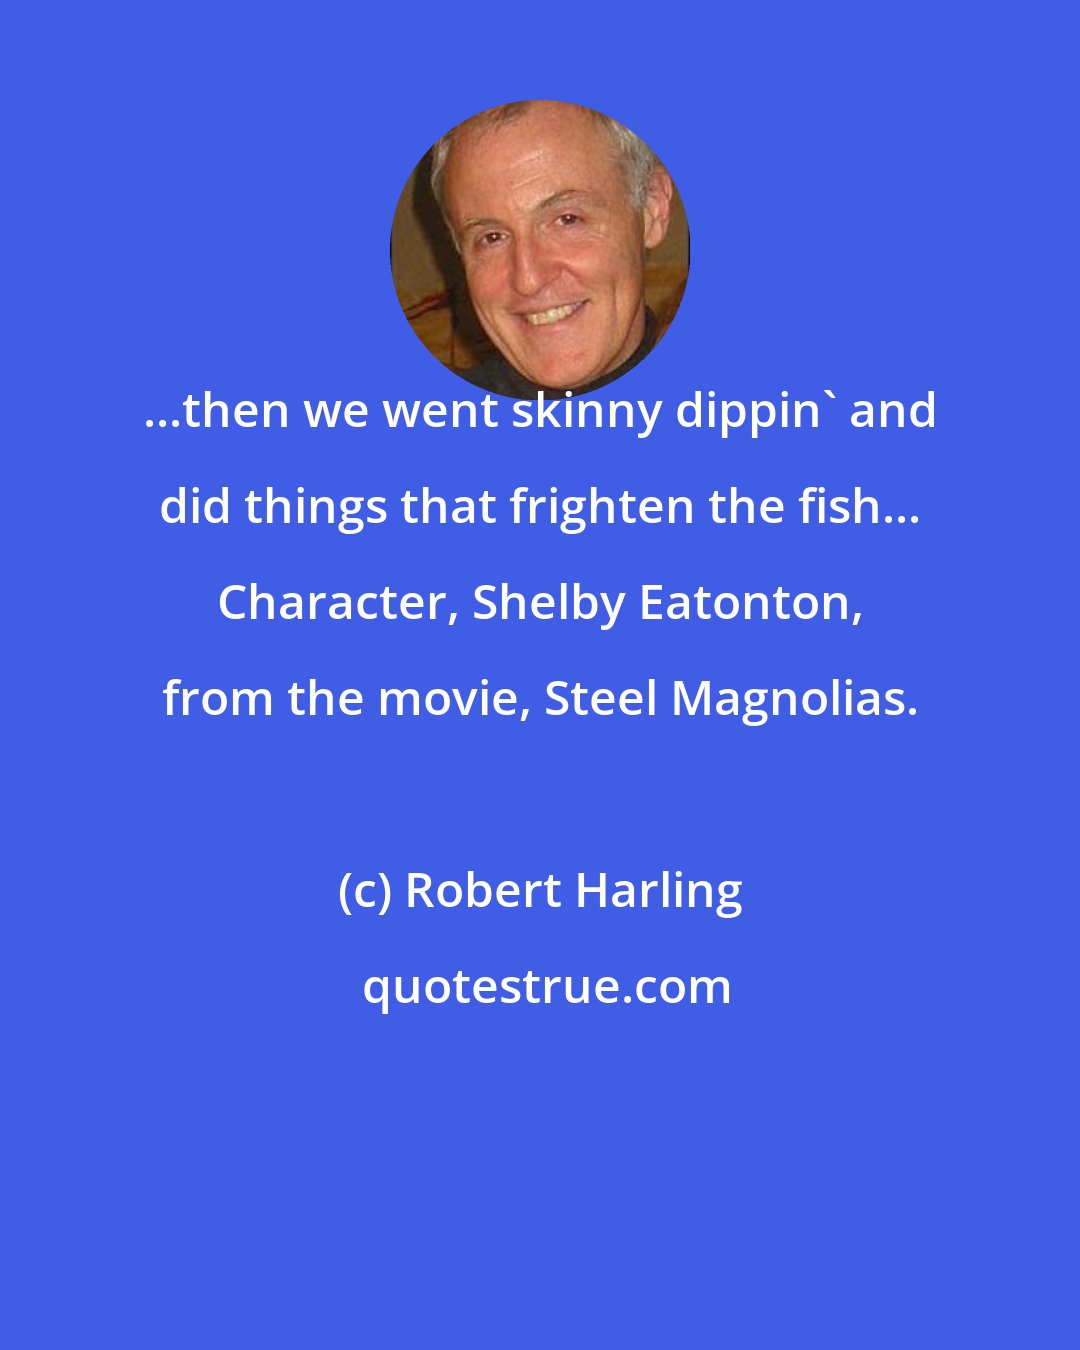 Robert Harling: ...then we went skinny dippin' and did things that frighten the fish... Character, Shelby Eatonton, from the movie, Steel Magnolias.